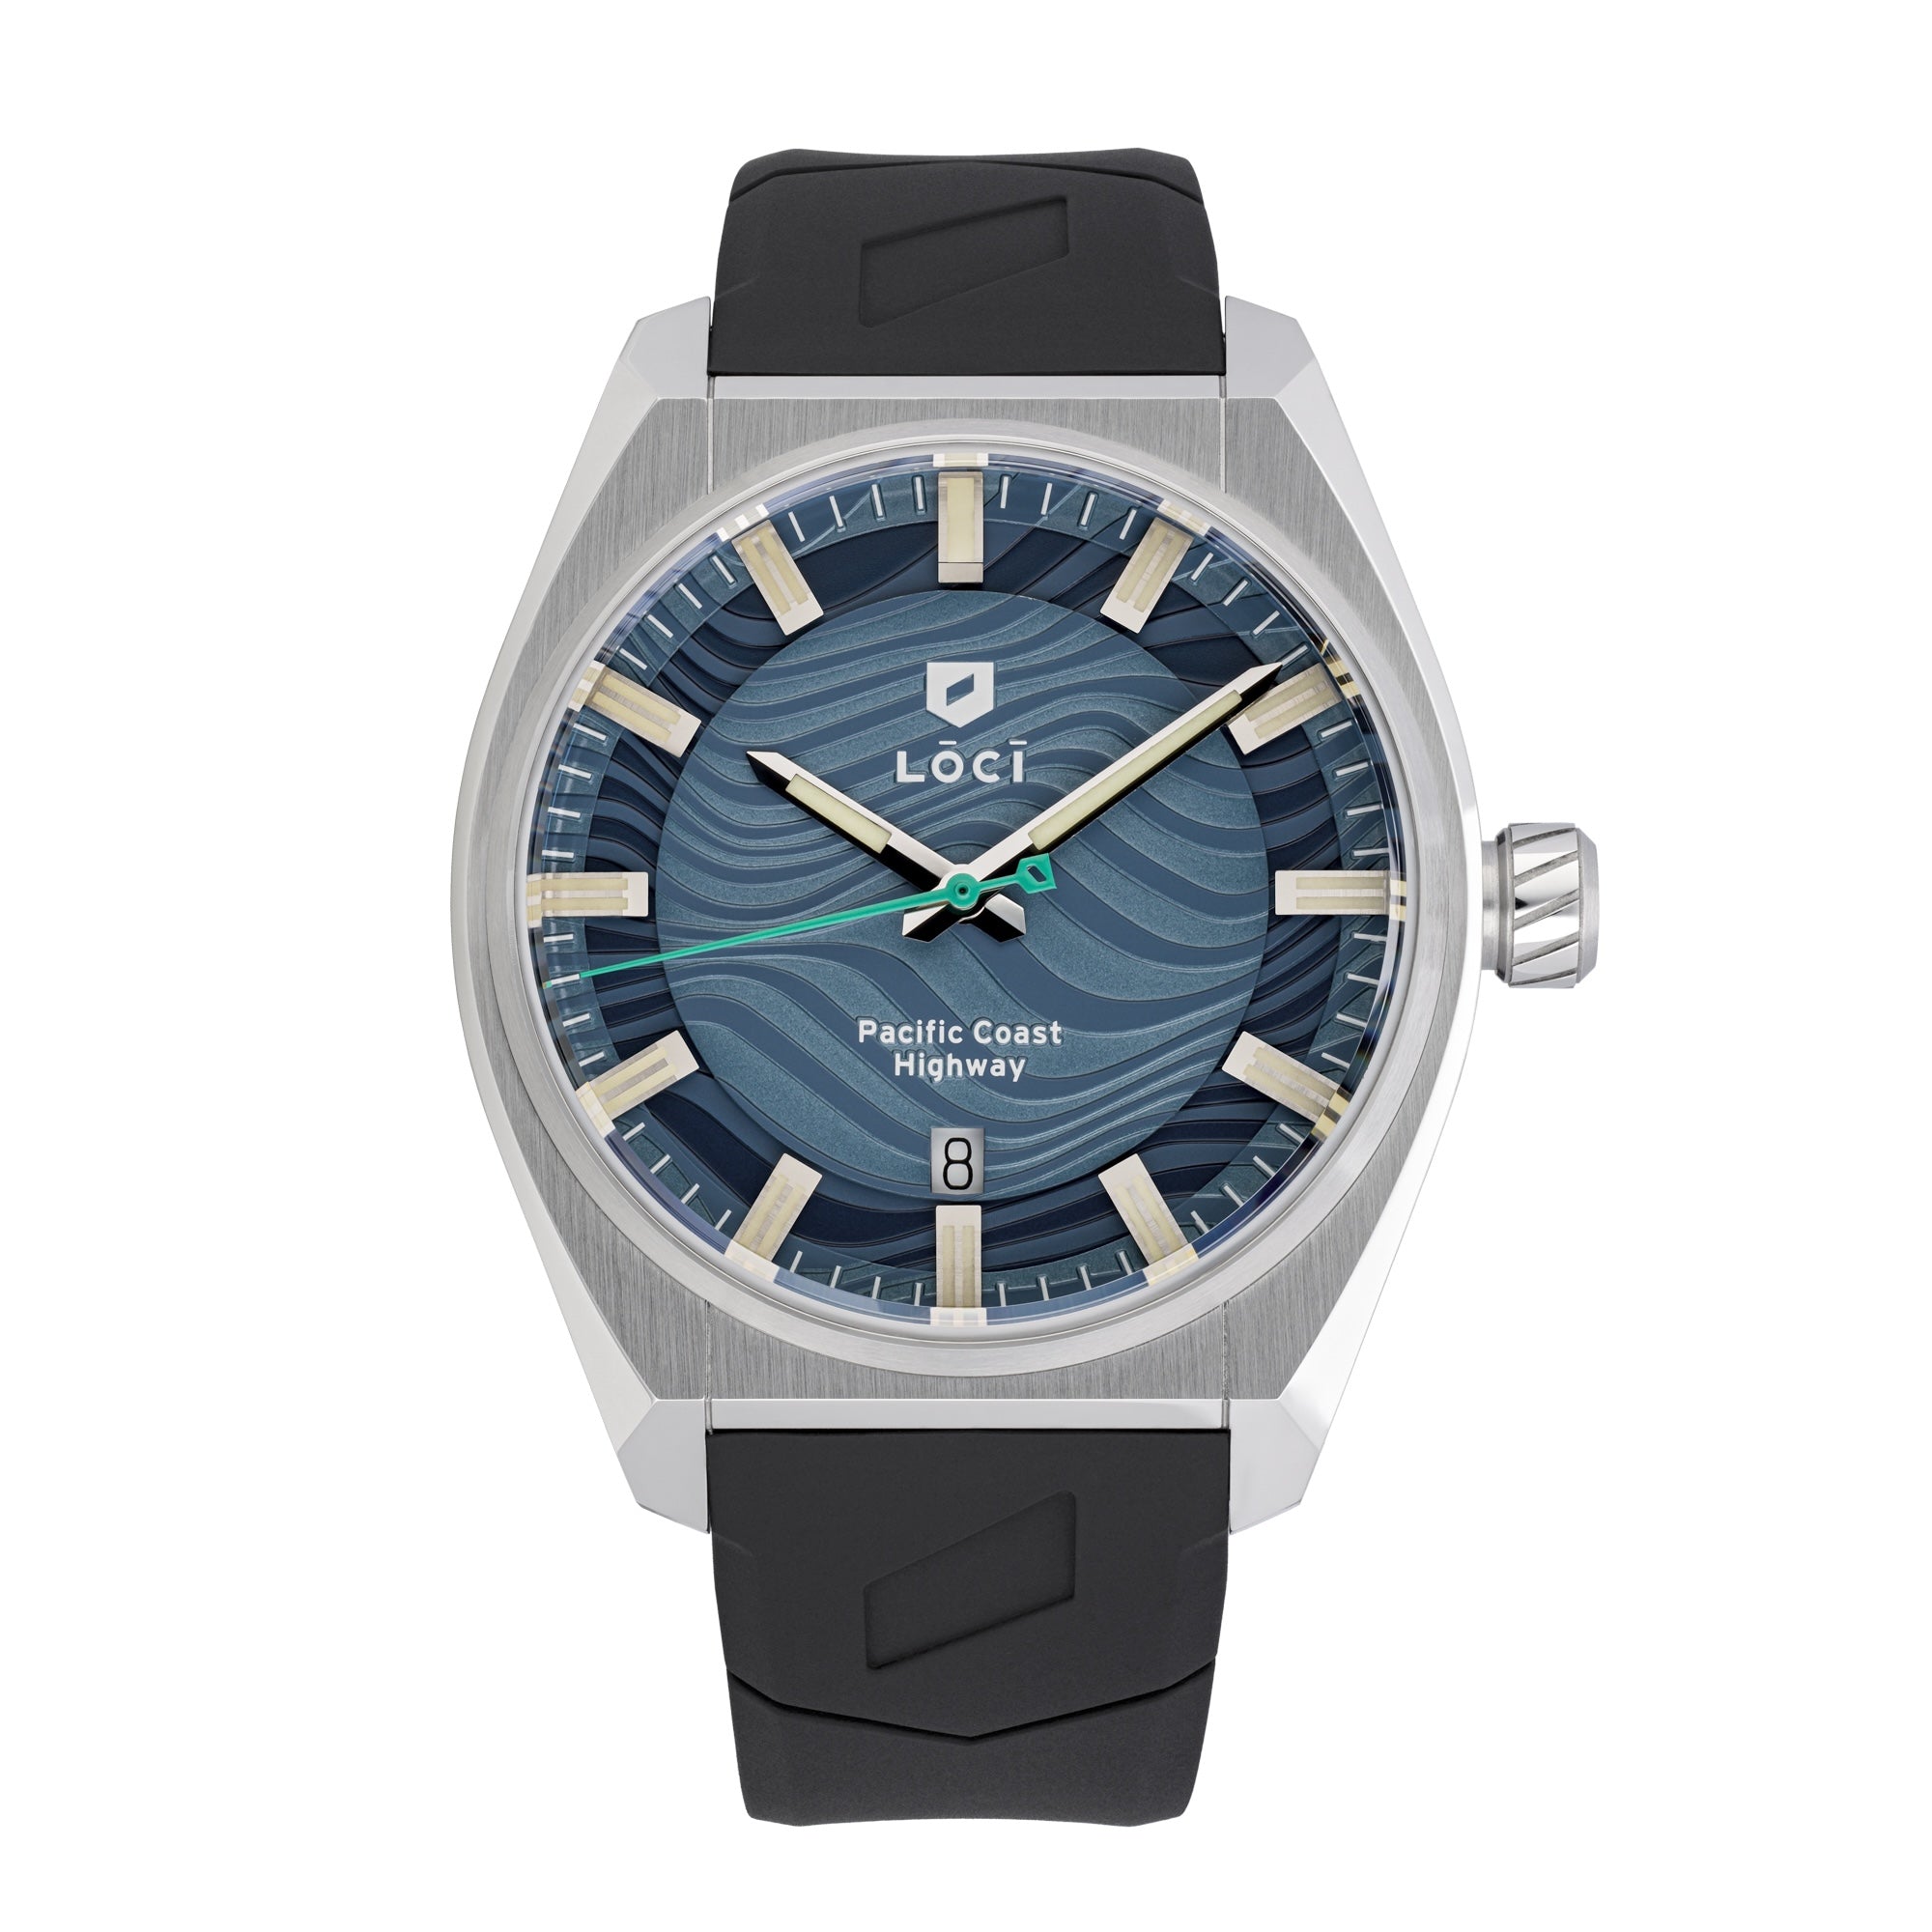 Pacific Coast Highway - Monterey Bay (Swiss Automatic)